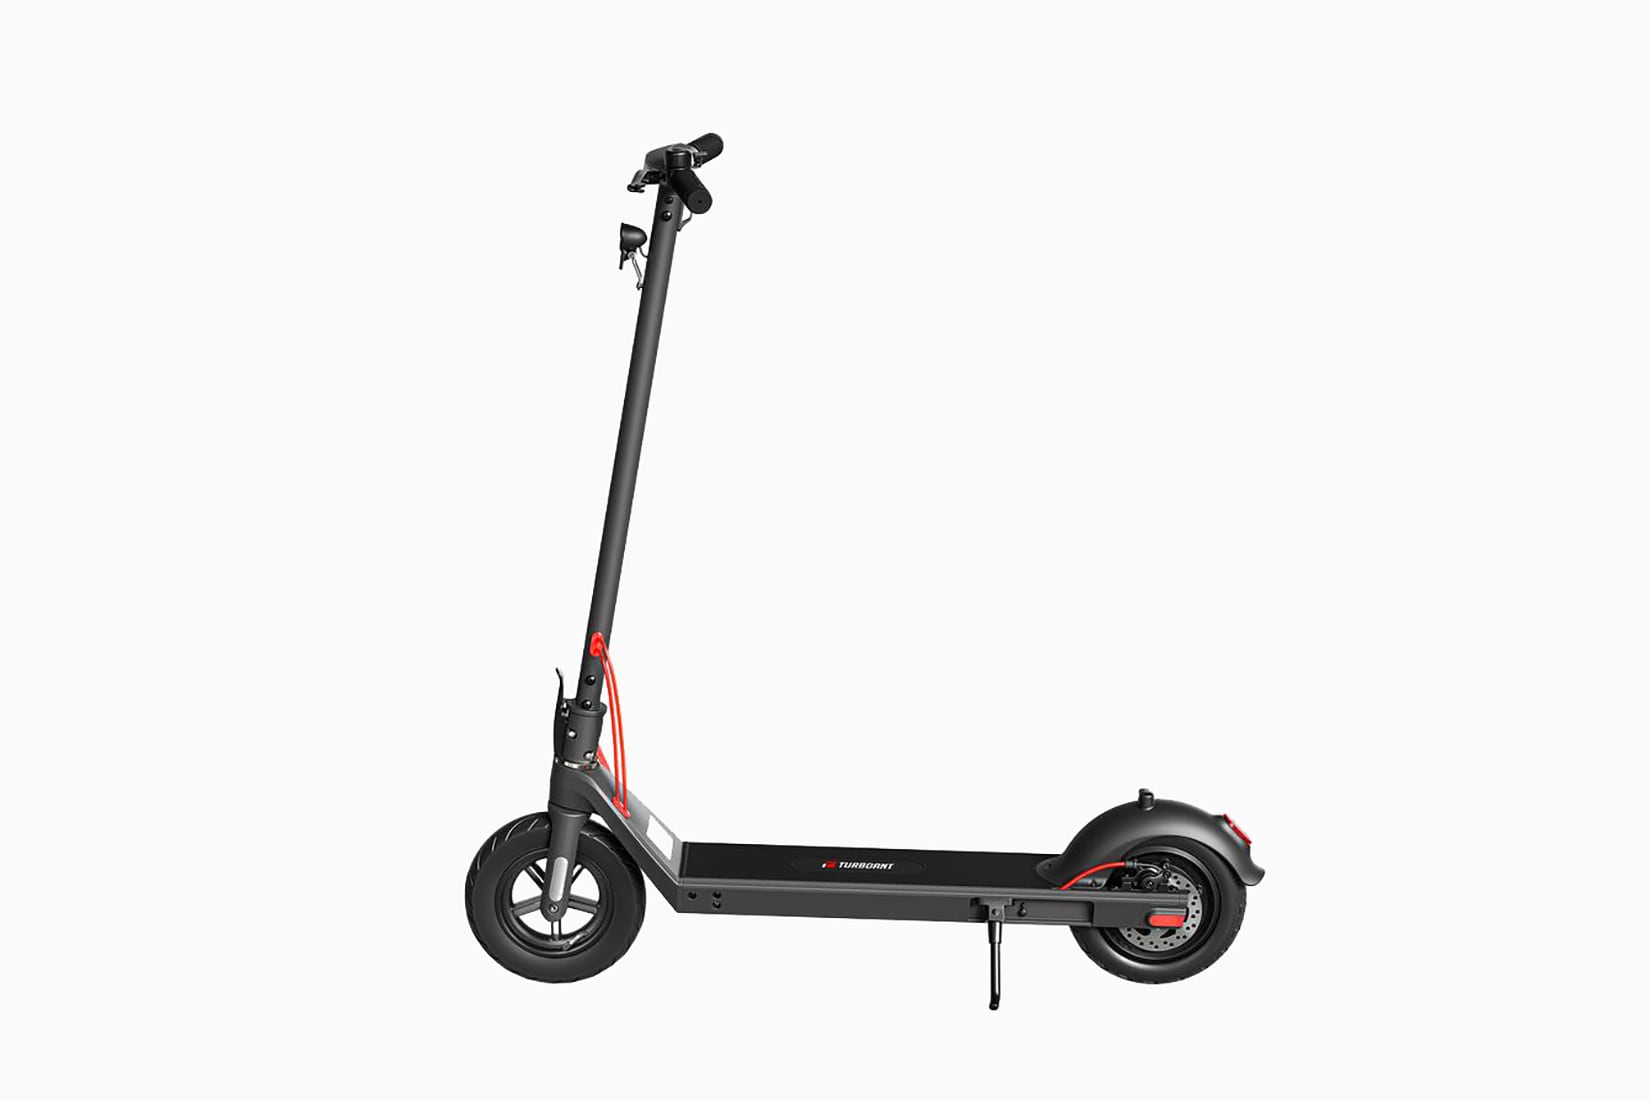 best electric scooter value turboant m10 review - Luxe Digital